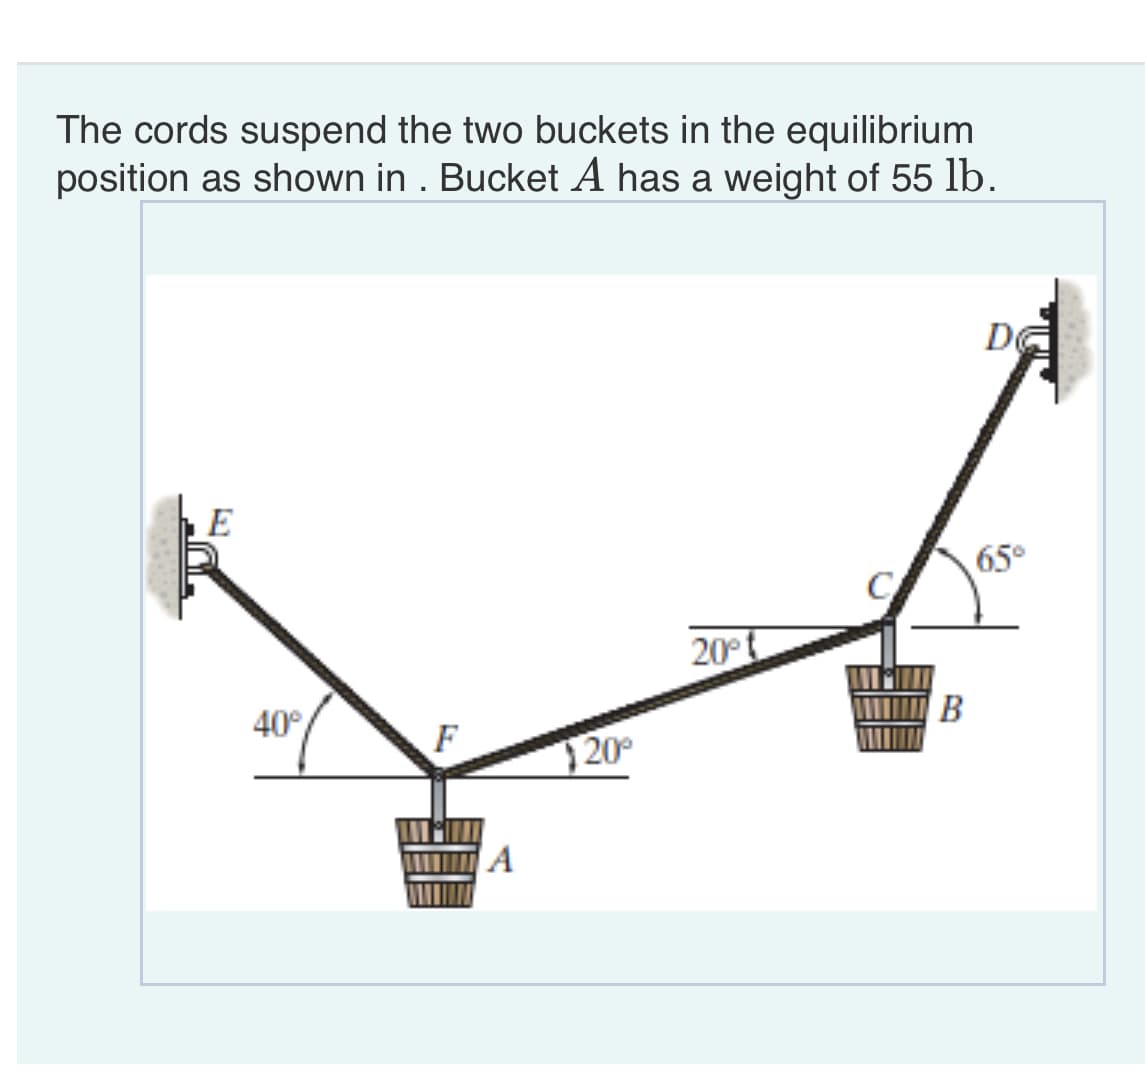 The cords suspend the two buckets in the equilibrium
position as shown in . Bucket A has a weight of 55 lb.
E
40°
F
A
$20⁰
20°
B
D